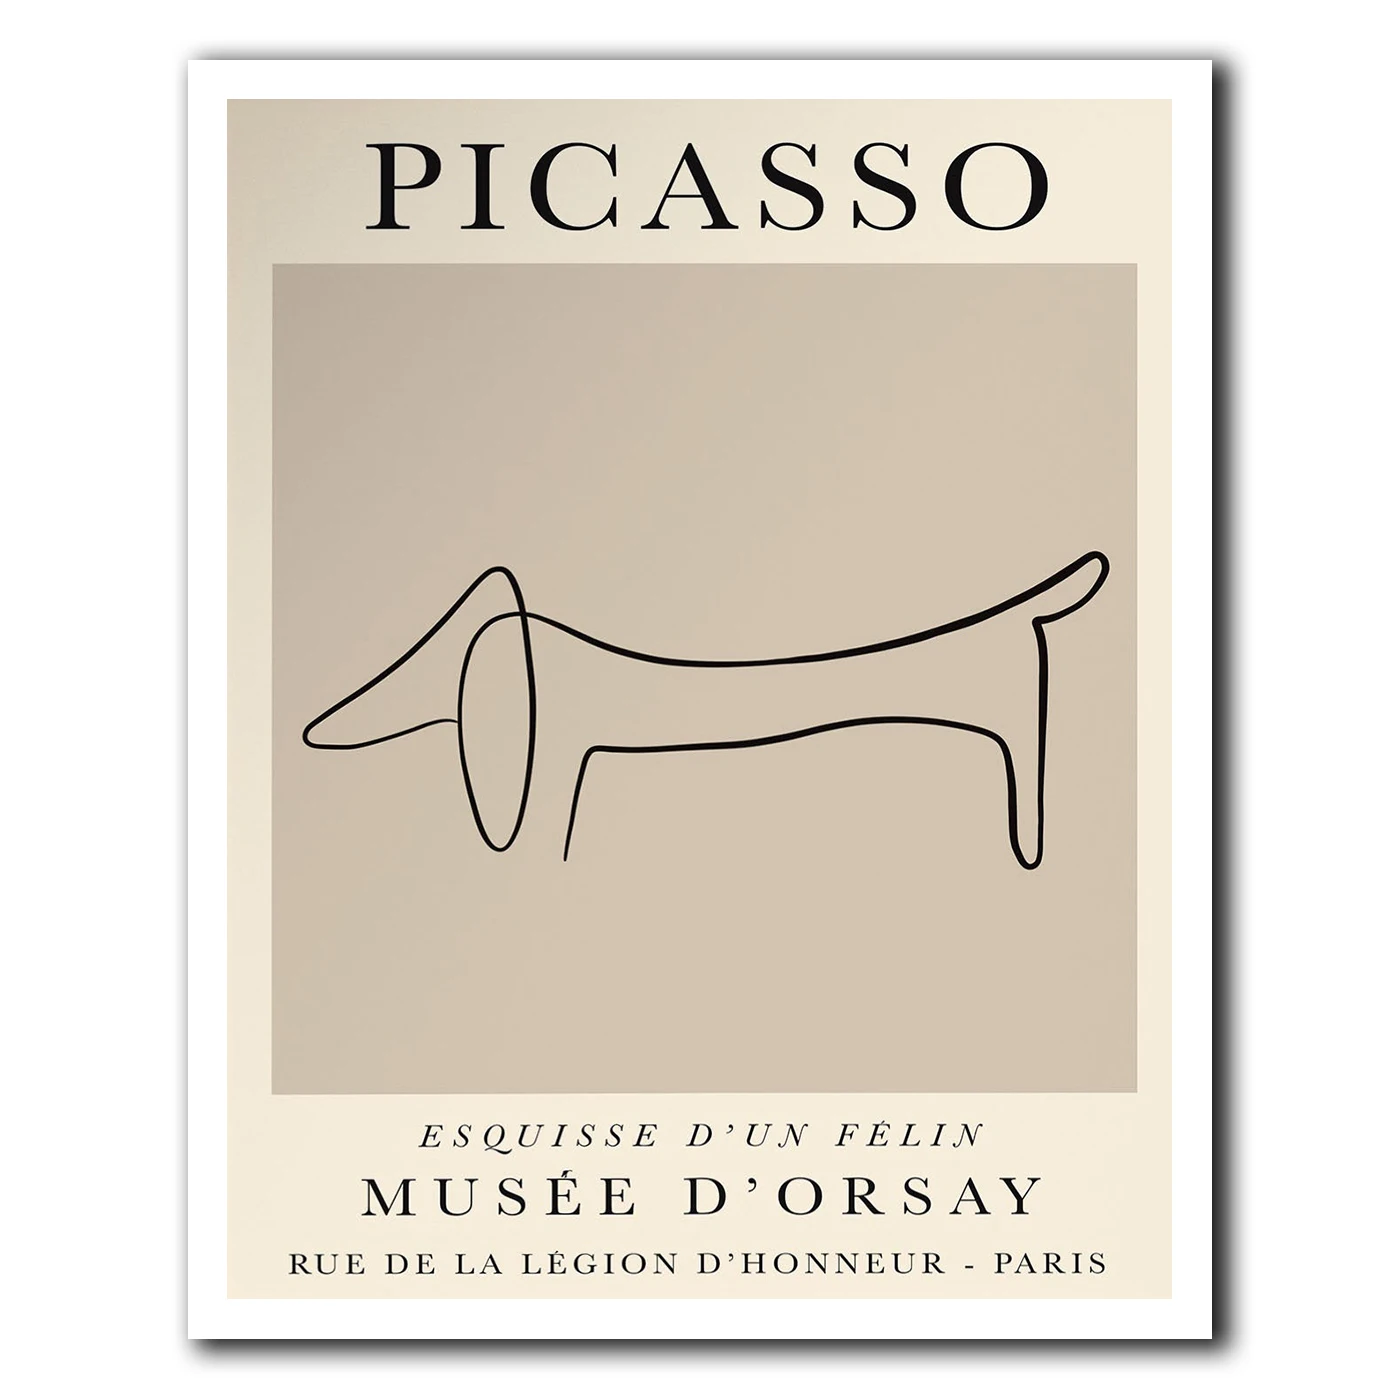 

Dog Sketch - Pablo Picasso Print, Picasso Wall Art, Printable Wall Art, Minimalist Wall Poster, Digital Download